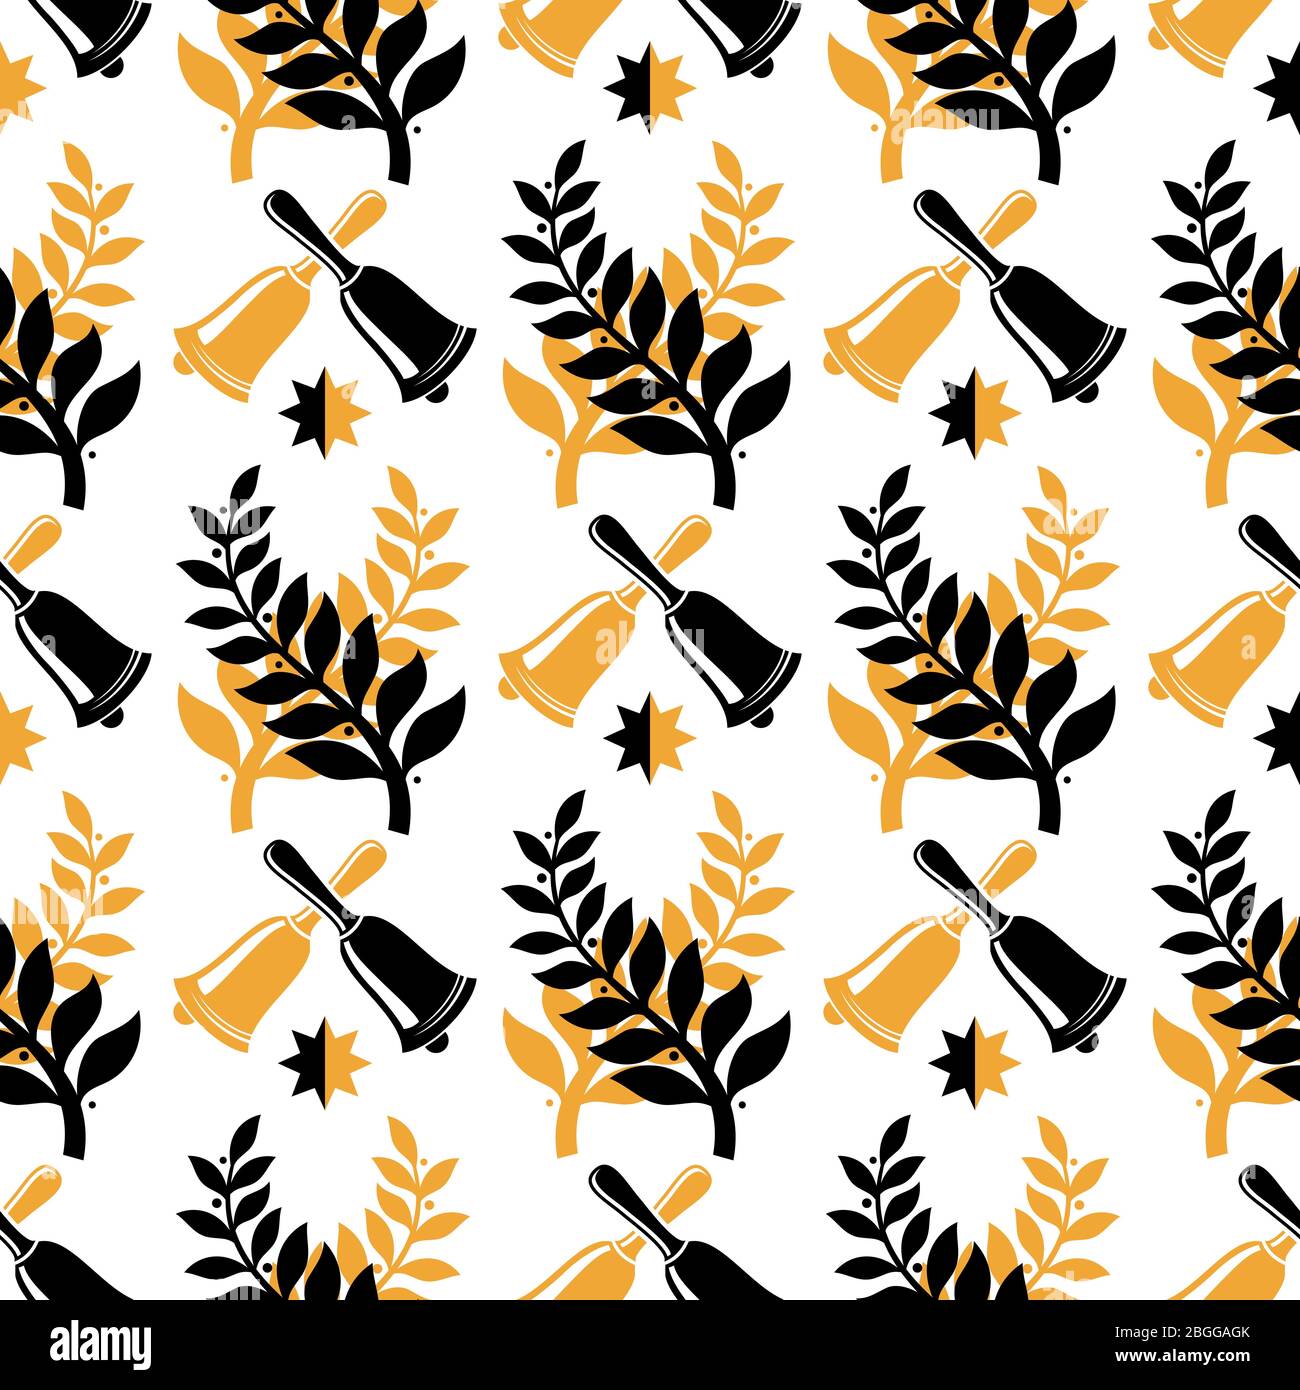 Vintage student graduate seamless pattern design. Black and golden bells and branches texture. Vector illustration Stock Vector